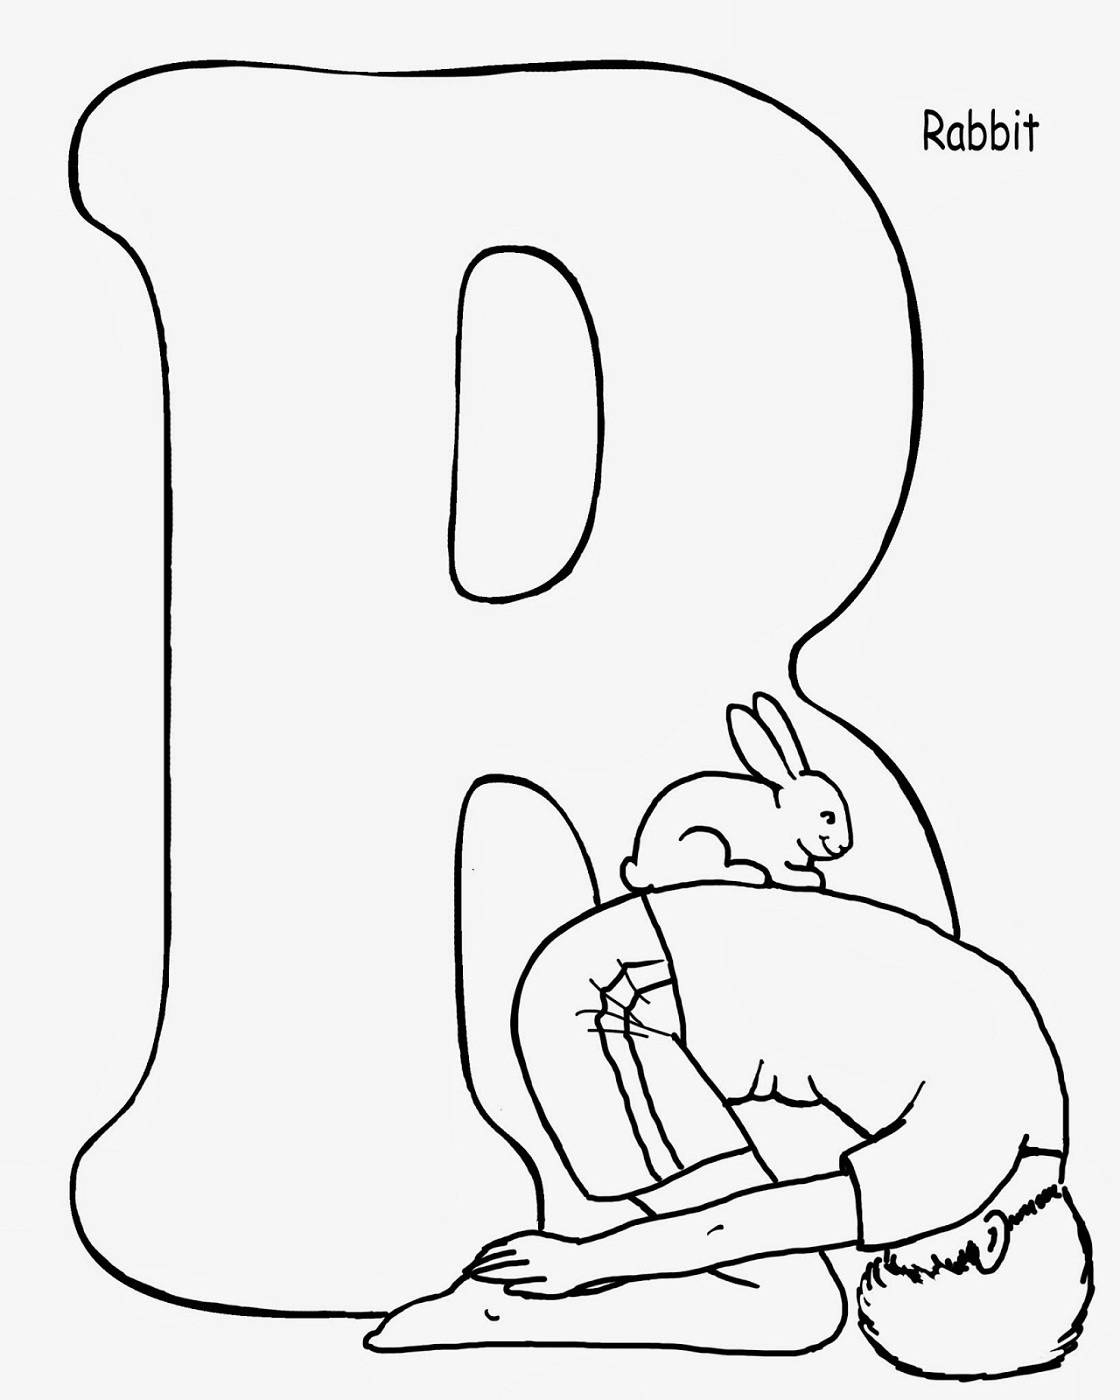 Coloring By Itself For Children
 Yoga Coloring Pages to Print